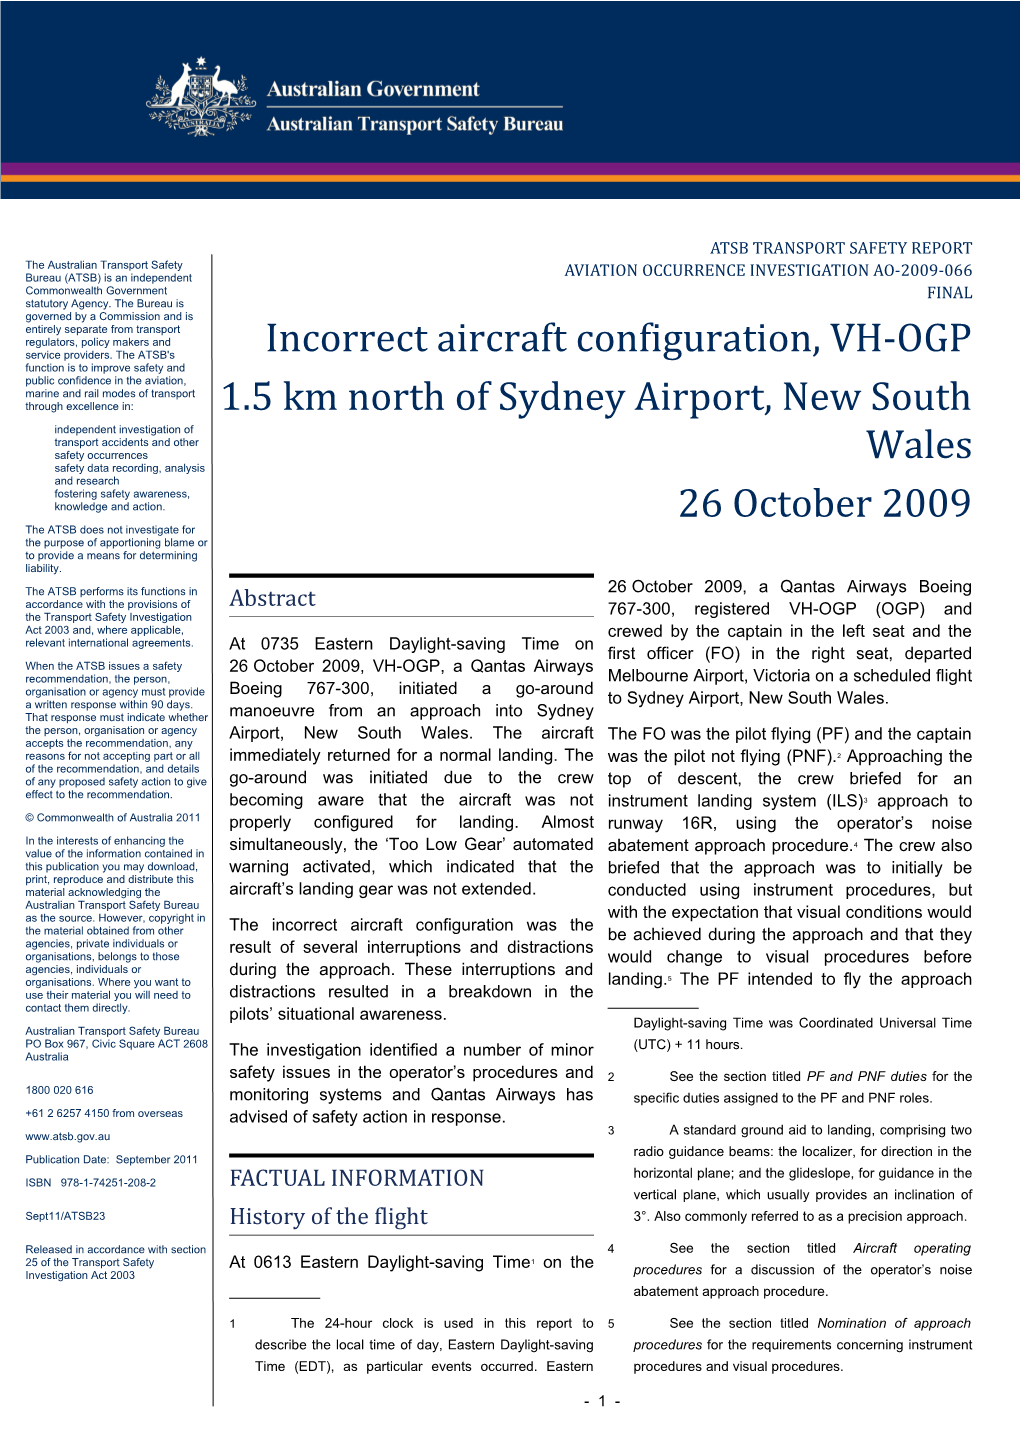 Incorrect Aircraft Configuration, VH-OGP 1.5 Km North of Sydney Airport, New South Wales